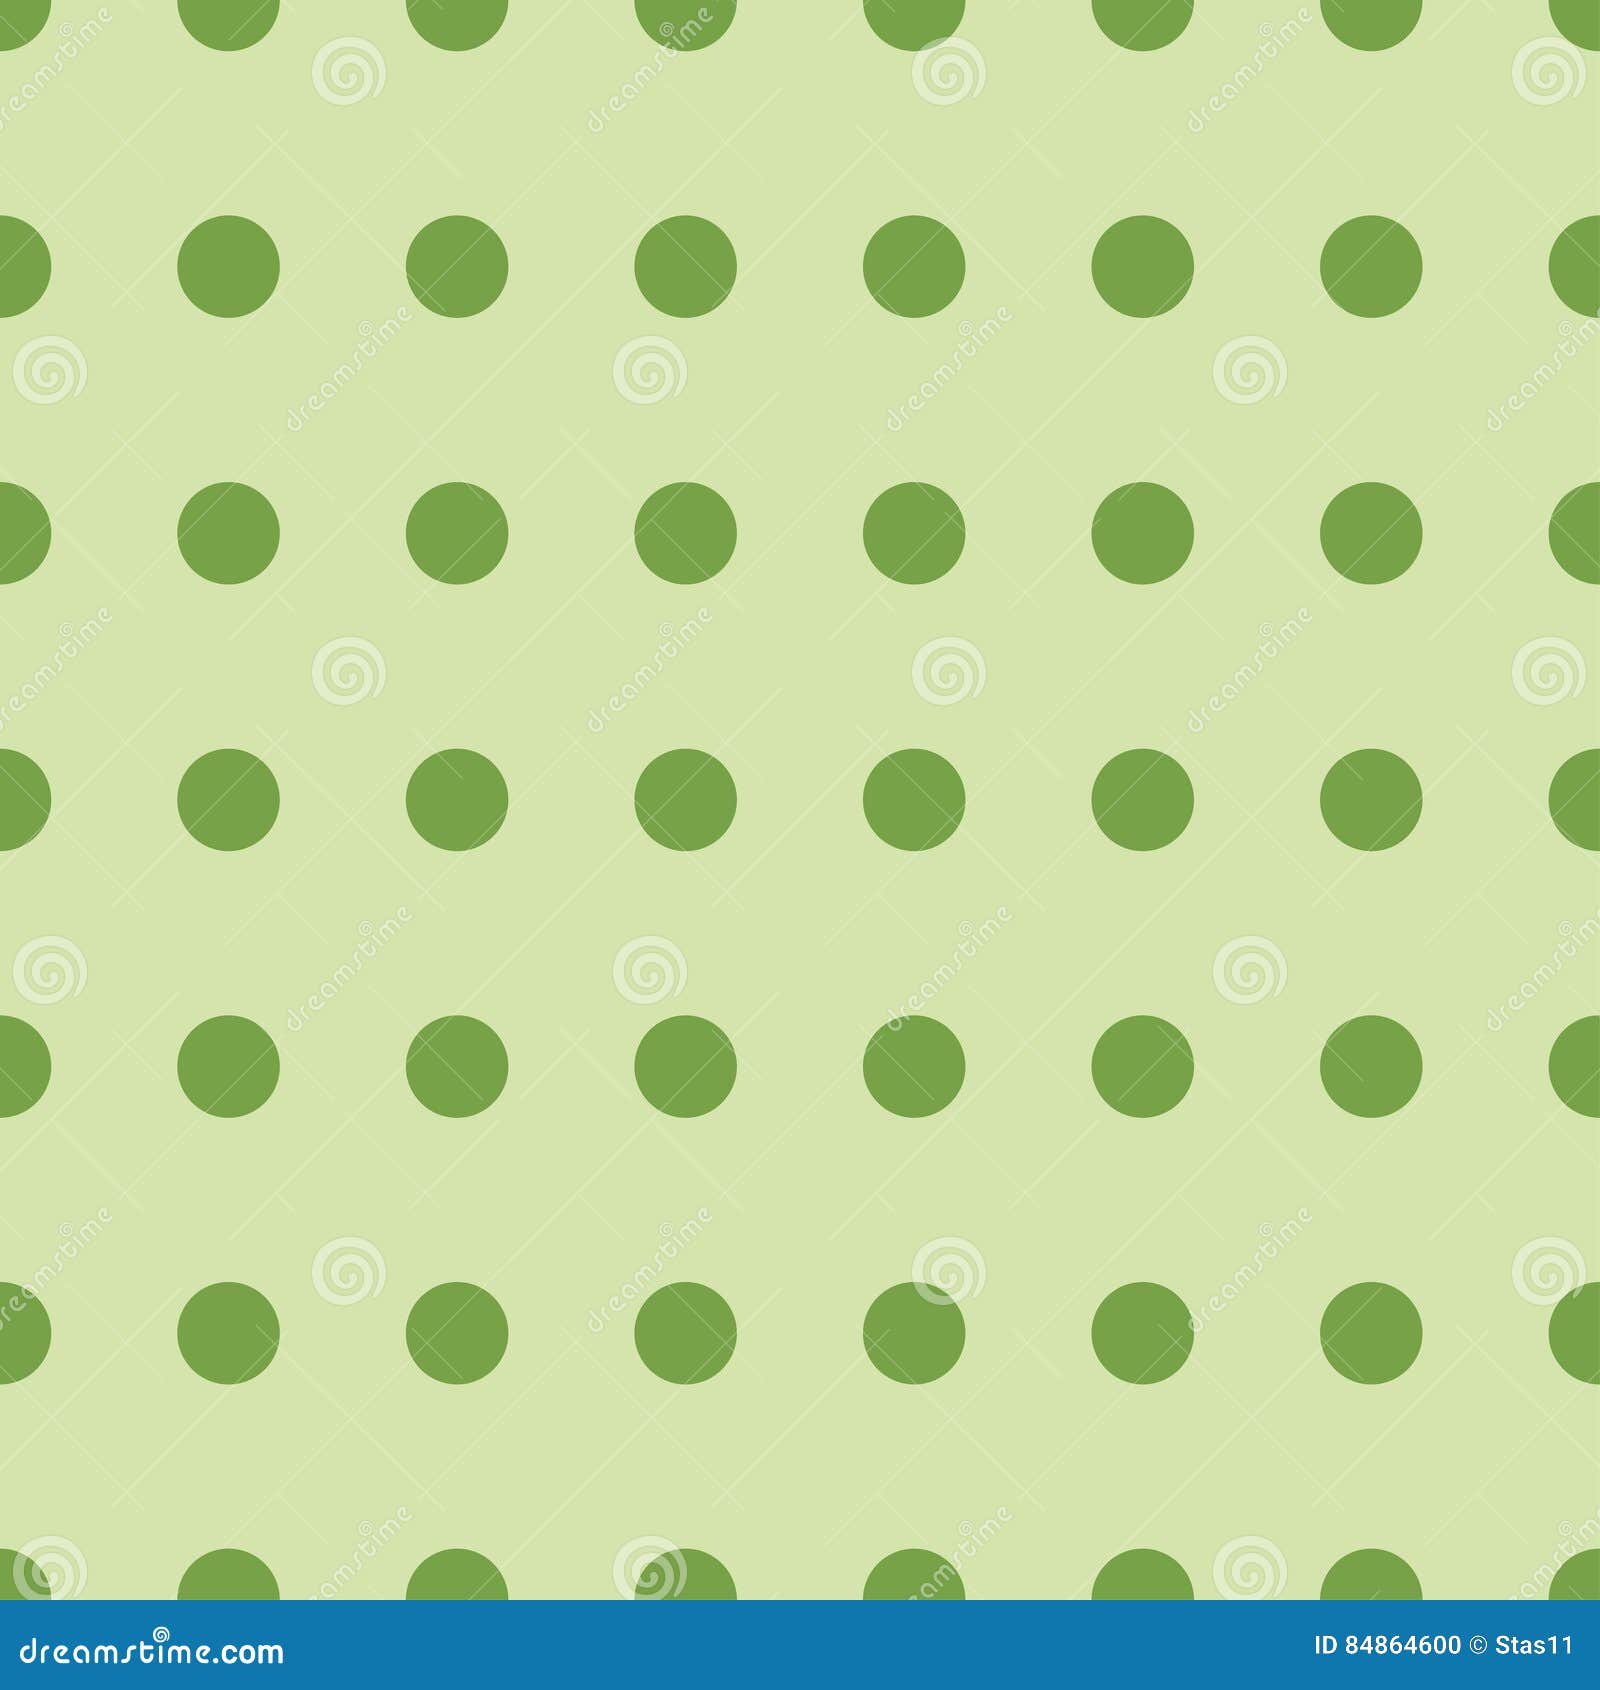 Seamless Retro Pattern with Green Circles. Vector Illustration Stock ...